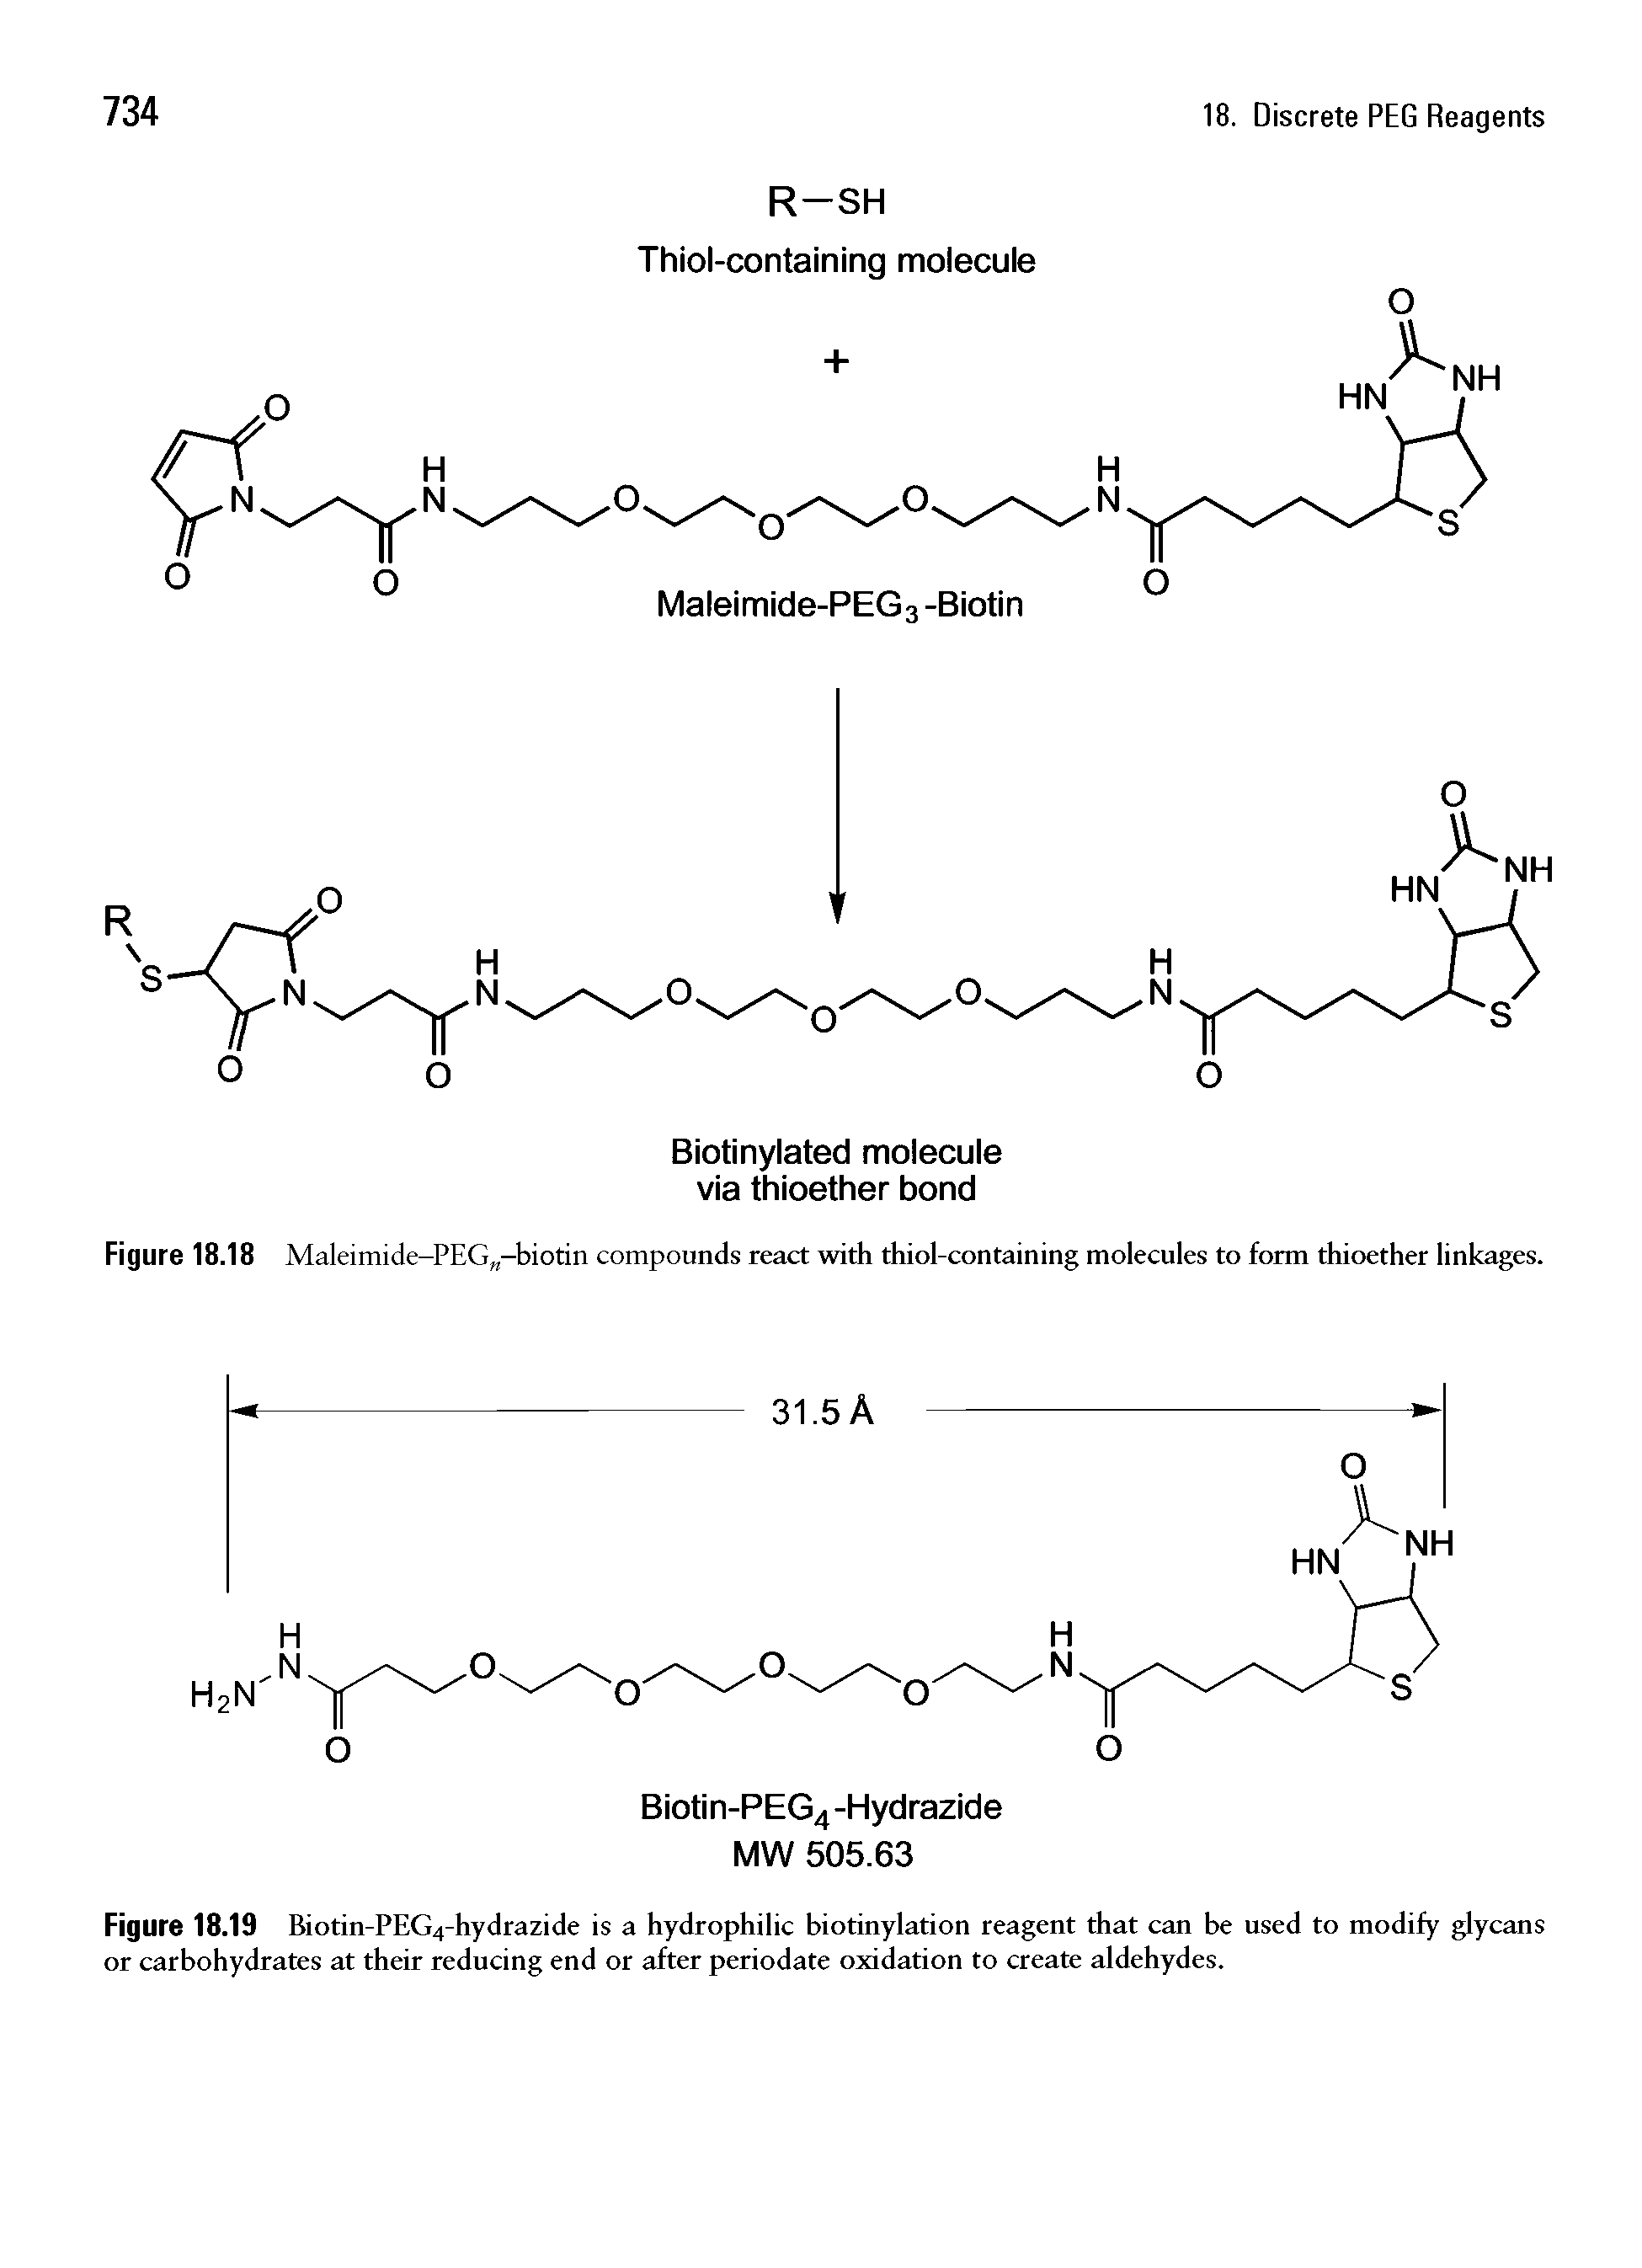 Figure 18.18 Maleimide-PEG -biotin compounds react with thiol-containing molecules to form thioether linkages.